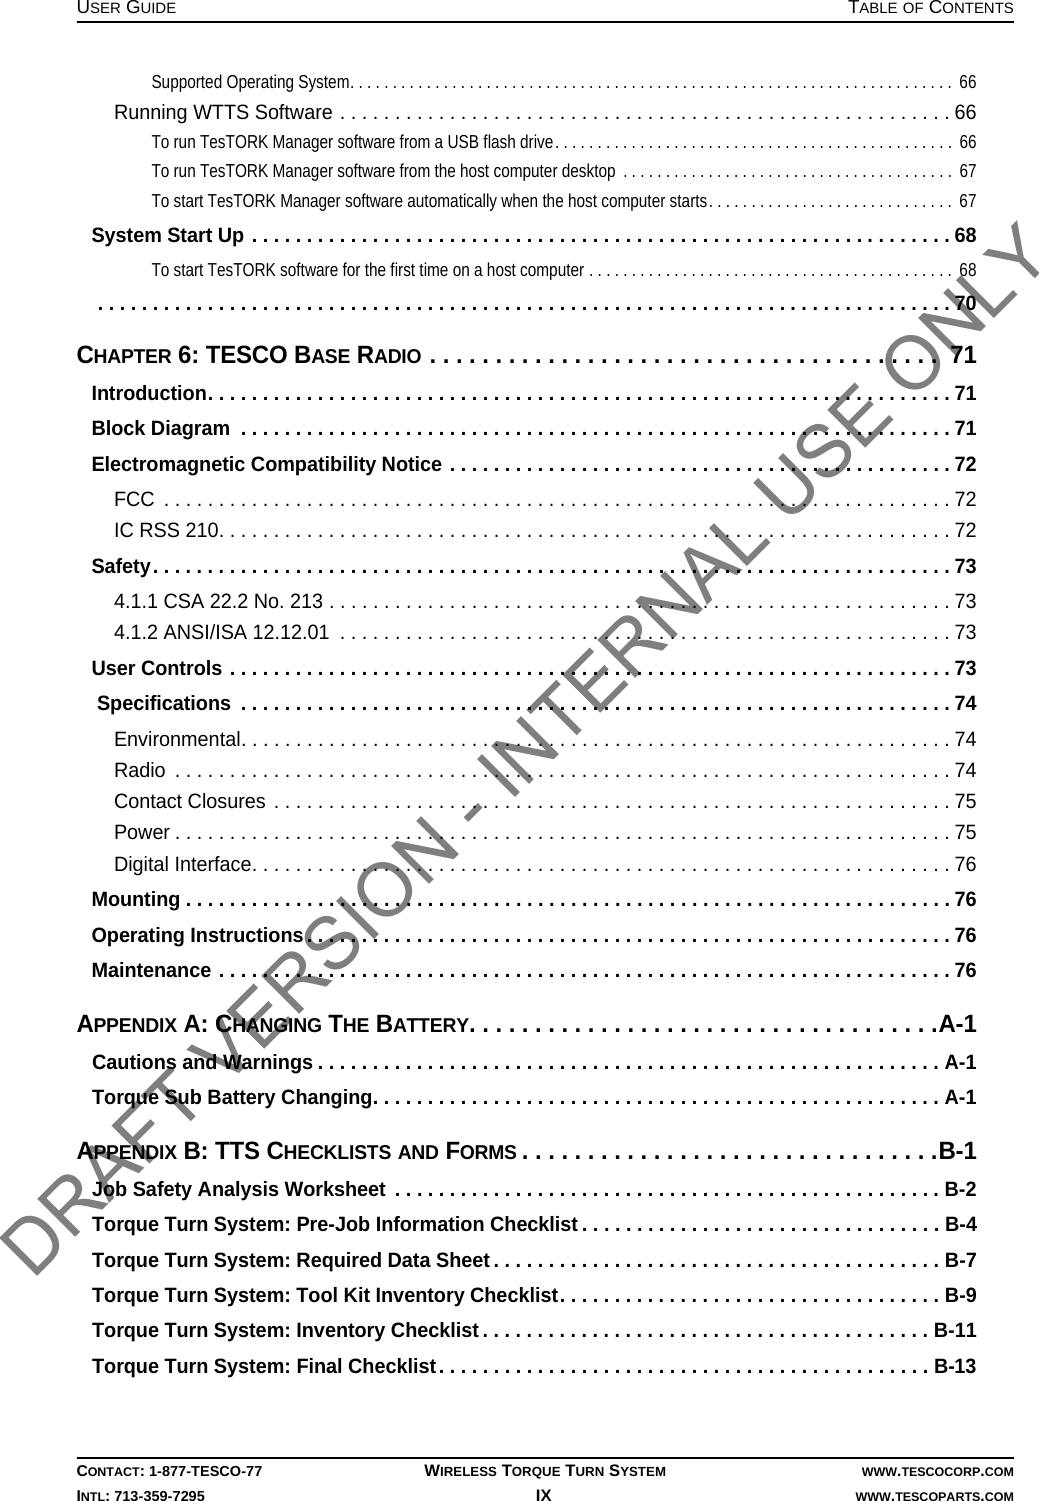 USER GUIDE TABLE OF CONTENTSCONTACT: 1-877-TESCO-77 WIRELESS TORQUE TURN SYSTEM WWW.TESCOCORP.COMINTL: 713-359-7295 IX    WWW.TESCOPARTS.COMSupported Operating System. . . . . . . . . . . . . . . . . . . . . . . . . . . . . . . . . . . . . . . . . . . . . . . . . . . . . . . . . . . . . . . . . . . . . . .  66Running WTTS Software . . . . . . . . . . . . . . . . . . . . . . . . . . . . . . . . . . . . . . . . . . . . . . . . . . . . . . . . 66To run TesTORK Manager software from a USB flash drive. . . . . . . . . . . . . . . . . . . . . . . . . . . . . . . . . . . . . . . . . . . . . . .  66To run TesTORK Manager software from the host computer desktop  . . . . . . . . . . . . . . . . . . . . . . . . . . . . . . . . . . . . . . .  67To start TesTORK Manager software automatically when the host computer starts. . . . . . . . . . . . . . . . . . . . . . . . . . . . .  67System Start Up . . . . . . . . . . . . . . . . . . . . . . . . . . . . . . . . . . . . . . . . . . . . . . . . . . . . . . . . . . . . . . . . 68To start TesTORK software for the first time on a host computer . . . . . . . . . . . . . . . . . . . . . . . . . . . . . . . . . . . . . . . . . . .  68 . . . . . . . . . . . . . . . . . . . . . . . . . . . . . . . . . . . . . . . . . . . . . . . . . . . . . . . . . . . . . . . . . . . . . . . . . . . . . . 70CHAPTER 6: TESCO BASE RADIO . . . . . . . . . . . . . . . . . . . . . . . . . . . . . . . . . . . . . . .  71Introduction. . . . . . . . . . . . . . . . . . . . . . . . . . . . . . . . . . . . . . . . . . . . . . . . . . . . . . . . . . . . . . . . . . . . 71Block Diagram  . . . . . . . . . . . . . . . . . . . . . . . . . . . . . . . . . . . . . . . . . . . . . . . . . . . . . . . . . . . . . . . . . 71Electromagnetic Compatibility Notice . . . . . . . . . . . . . . . . . . . . . . . . . . . . . . . . . . . . . . . . . . . . . .72FCC  . . . . . . . . . . . . . . . . . . . . . . . . . . . . . . . . . . . . . . . . . . . . . . . . . . . . . . . . . . . . . . . . . . . . . . . . 72IC RSS 210. . . . . . . . . . . . . . . . . . . . . . . . . . . . . . . . . . . . . . . . . . . . . . . . . . . . . . . . . . . . . . . . . . . 72Safety. . . . . . . . . . . . . . . . . . . . . . . . . . . . . . . . . . . . . . . . . . . . . . . . . . . . . . . . . . . . . . . . . . . . . . . . . 734.1.1 CSA 22.2 No. 213 . . . . . . . . . . . . . . . . . . . . . . . . . . . . . . . . . . . . . . . . . . . . . . . . . . . . . . . . . 734.1.2 ANSI/ISA 12.12.01  . . . . . . . . . . . . . . . . . . . . . . . . . . . . . . . . . . . . . . . . . . . . . . . . . . . . . . . . 73User Controls . . . . . . . . . . . . . . . . . . . . . . . . . . . . . . . . . . . . . . . . . . . . . . . . . . . . . . . . . . . . . . . . . . 73 Specifications  . . . . . . . . . . . . . . . . . . . . . . . . . . . . . . . . . . . . . . . . . . . . . . . . . . . . . . . . . . . . . . . . . 74Environmental. . . . . . . . . . . . . . . . . . . . . . . . . . . . . . . . . . . . . . . . . . . . . . . . . . . . . . . . . . . . . . . . . 74Radio  . . . . . . . . . . . . . . . . . . . . . . . . . . . . . . . . . . . . . . . . . . . . . . . . . . . . . . . . . . . . . . . . . . . . . . . 74Contact Closures . . . . . . . . . . . . . . . . . . . . . . . . . . . . . . . . . . . . . . . . . . . . . . . . . . . . . . . . . . . . . . 75Power . . . . . . . . . . . . . . . . . . . . . . . . . . . . . . . . . . . . . . . . . . . . . . . . . . . . . . . . . . . . . . . . . . . . . . . 75Digital Interface. . . . . . . . . . . . . . . . . . . . . . . . . . . . . . . . . . . . . . . . . . . . . . . . . . . . . . . . . . . . . . . . 76Mounting . . . . . . . . . . . . . . . . . . . . . . . . . . . . . . . . . . . . . . . . . . . . . . . . . . . . . . . . . . . . . . . . . . . . . . 76Operating Instructions. . . . . . . . . . . . . . . . . . . . . . . . . . . . . . . . . . . . . . . . . . . . . . . . . . . . . . . . . . . 76Maintenance . . . . . . . . . . . . . . . . . . . . . . . . . . . . . . . . . . . . . . . . . . . . . . . . . . . . . . . . . . . . . . . . . . . 76APPENDIX A: CHANGING THE BATTERY. . . . . . . . . . . . . . . . . . . . . . . . . . . . . . . . . . . .A-1Cautions and Warnings . . . . . . . . . . . . . . . . . . . . . . . . . . . . . . . . . . . . . . . . . . . . . . . . . . . . . . . . . A-1Torque Sub Battery Changing. . . . . . . . . . . . . . . . . . . . . . . . . . . . . . . . . . . . . . . . . . . . . . . . . . . . A-1APPENDIX B: TTS CHECKLISTS AND FORMS. . . . . . . . . . . . . . . . . . . . . . . . . . . . . . . .B-1Job Safety Analysis Worksheet  . . . . . . . . . . . . . . . . . . . . . . . . . . . . . . . . . . . . . . . . . . . . . . . . . . B-2Torque Turn System: Pre-Job Information Checklist . . . . . . . . . . . . . . . . . . . . . . . . . . . . . . . . . B-4Torque Turn System: Required Data Sheet . . . . . . . . . . . . . . . . . . . . . . . . . . . . . . . . . . . . . . . . . B-7Torque Turn System: Tool Kit Inventory Checklist. . . . . . . . . . . . . . . . . . . . . . . . . . . . . . . . . . . B-9Torque Turn System: Inventory Checklist . . . . . . . . . . . . . . . . . . . . . . . . . . . . . . . . . . . . . . . . . B-11Torque Turn System: Final Checklist. . . . . . . . . . . . . . . . . . . . . . . . . . . . . . . . . . . . . . . . . . . . . B-13DRAFT VERSION - INTERNAL USE ONLY